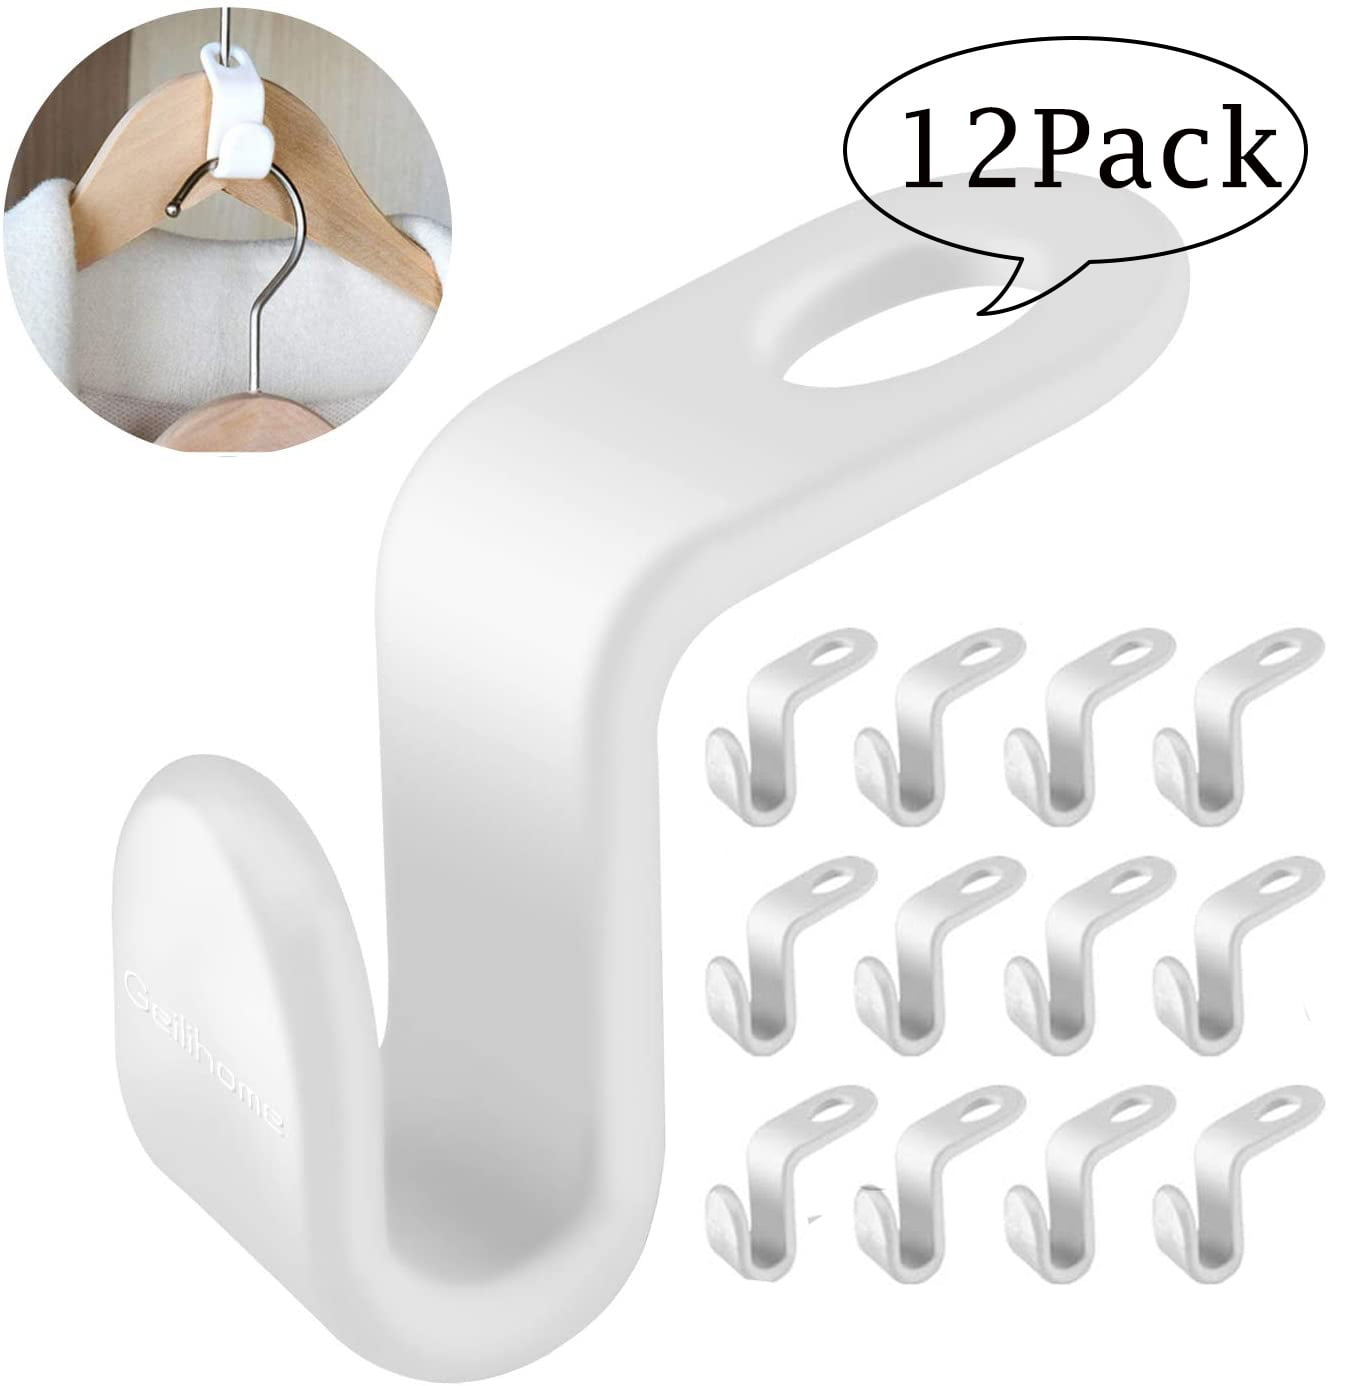 6 pcs Clothes Hanger Connector Space-saving Cascading For Pants Plastic O2O0